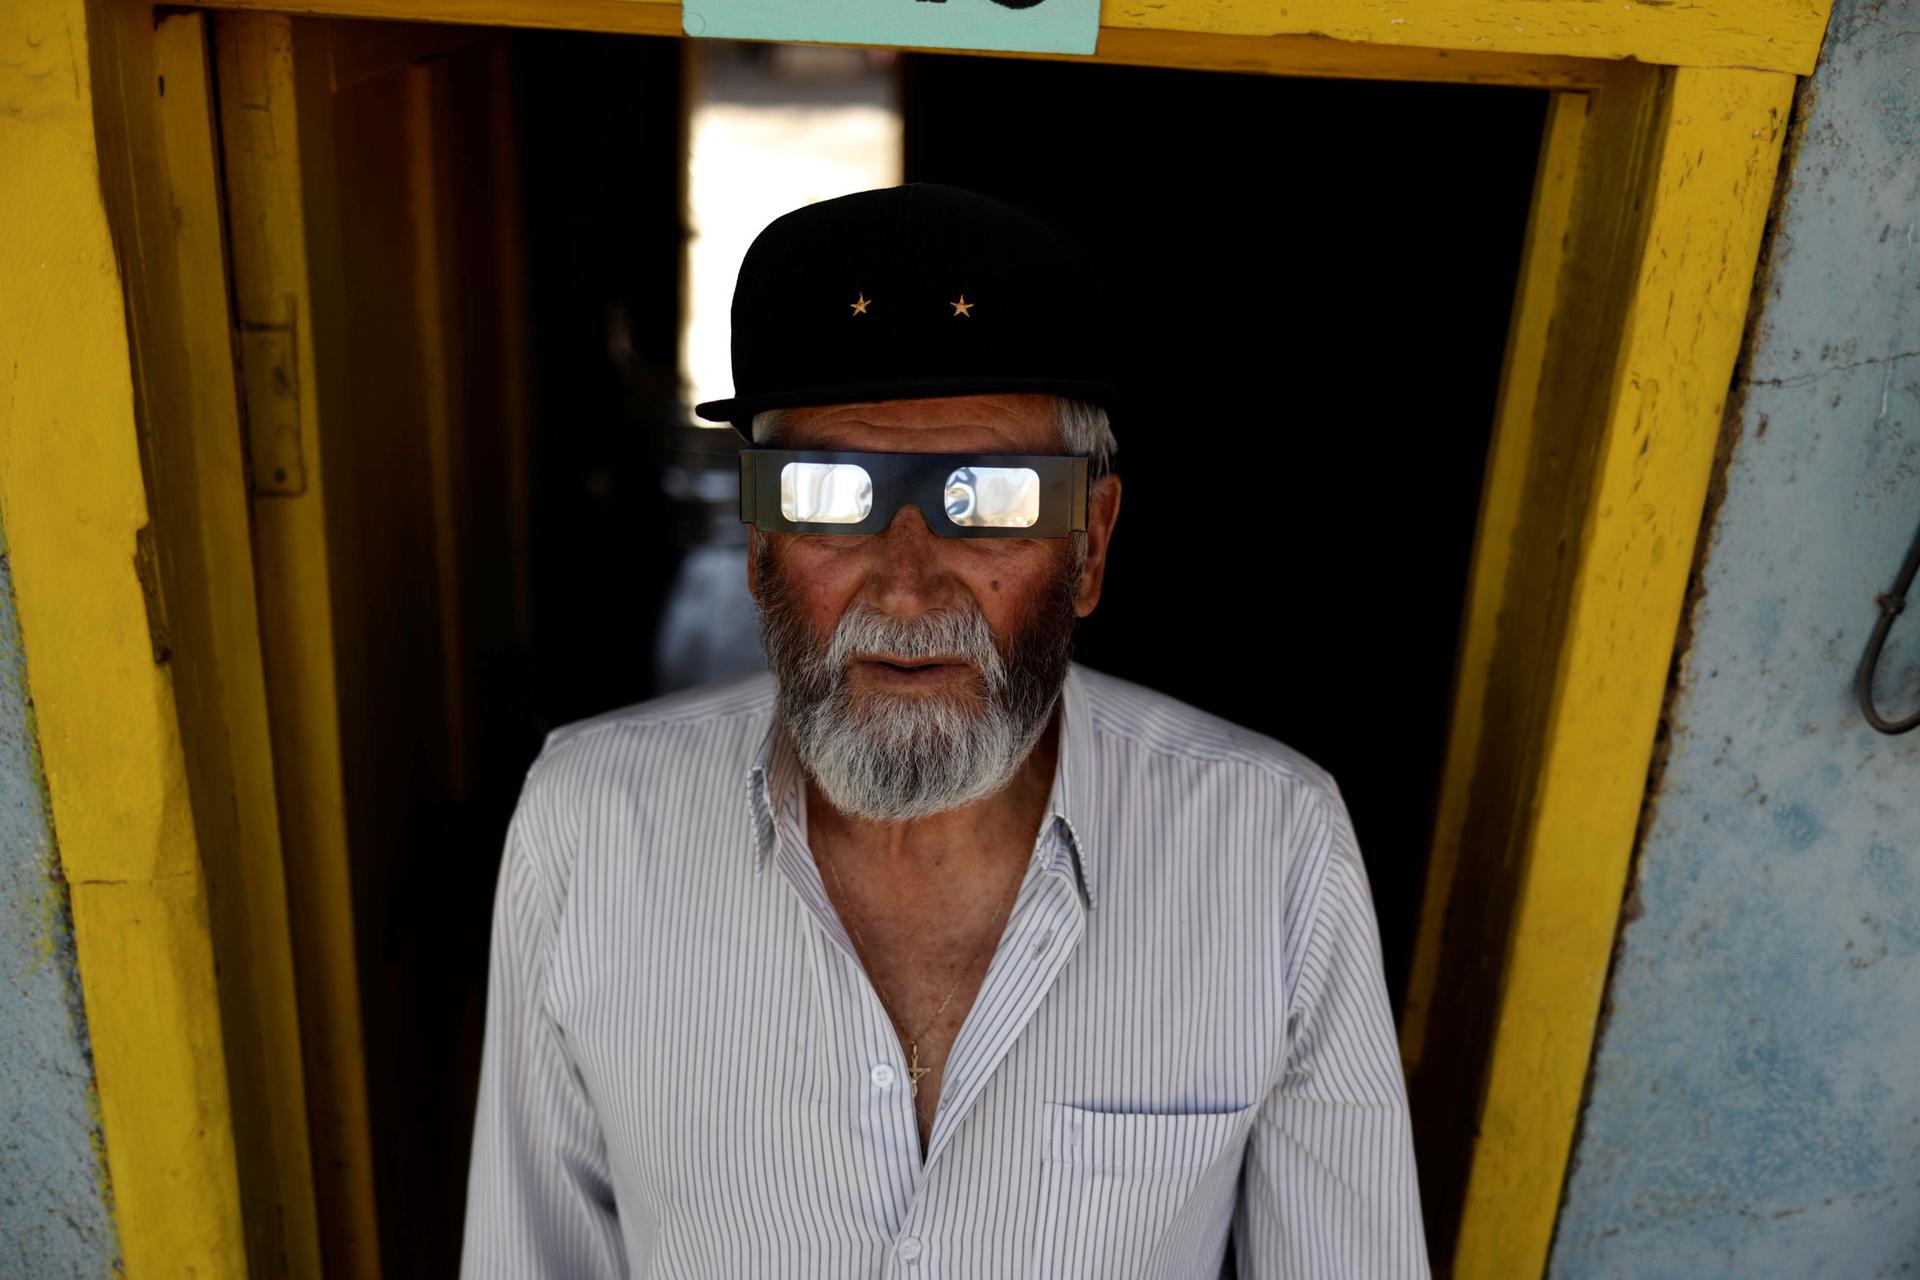 A portrait photograph shows an older man with shiny solar eclipse glasses standing in a yellow door frame.